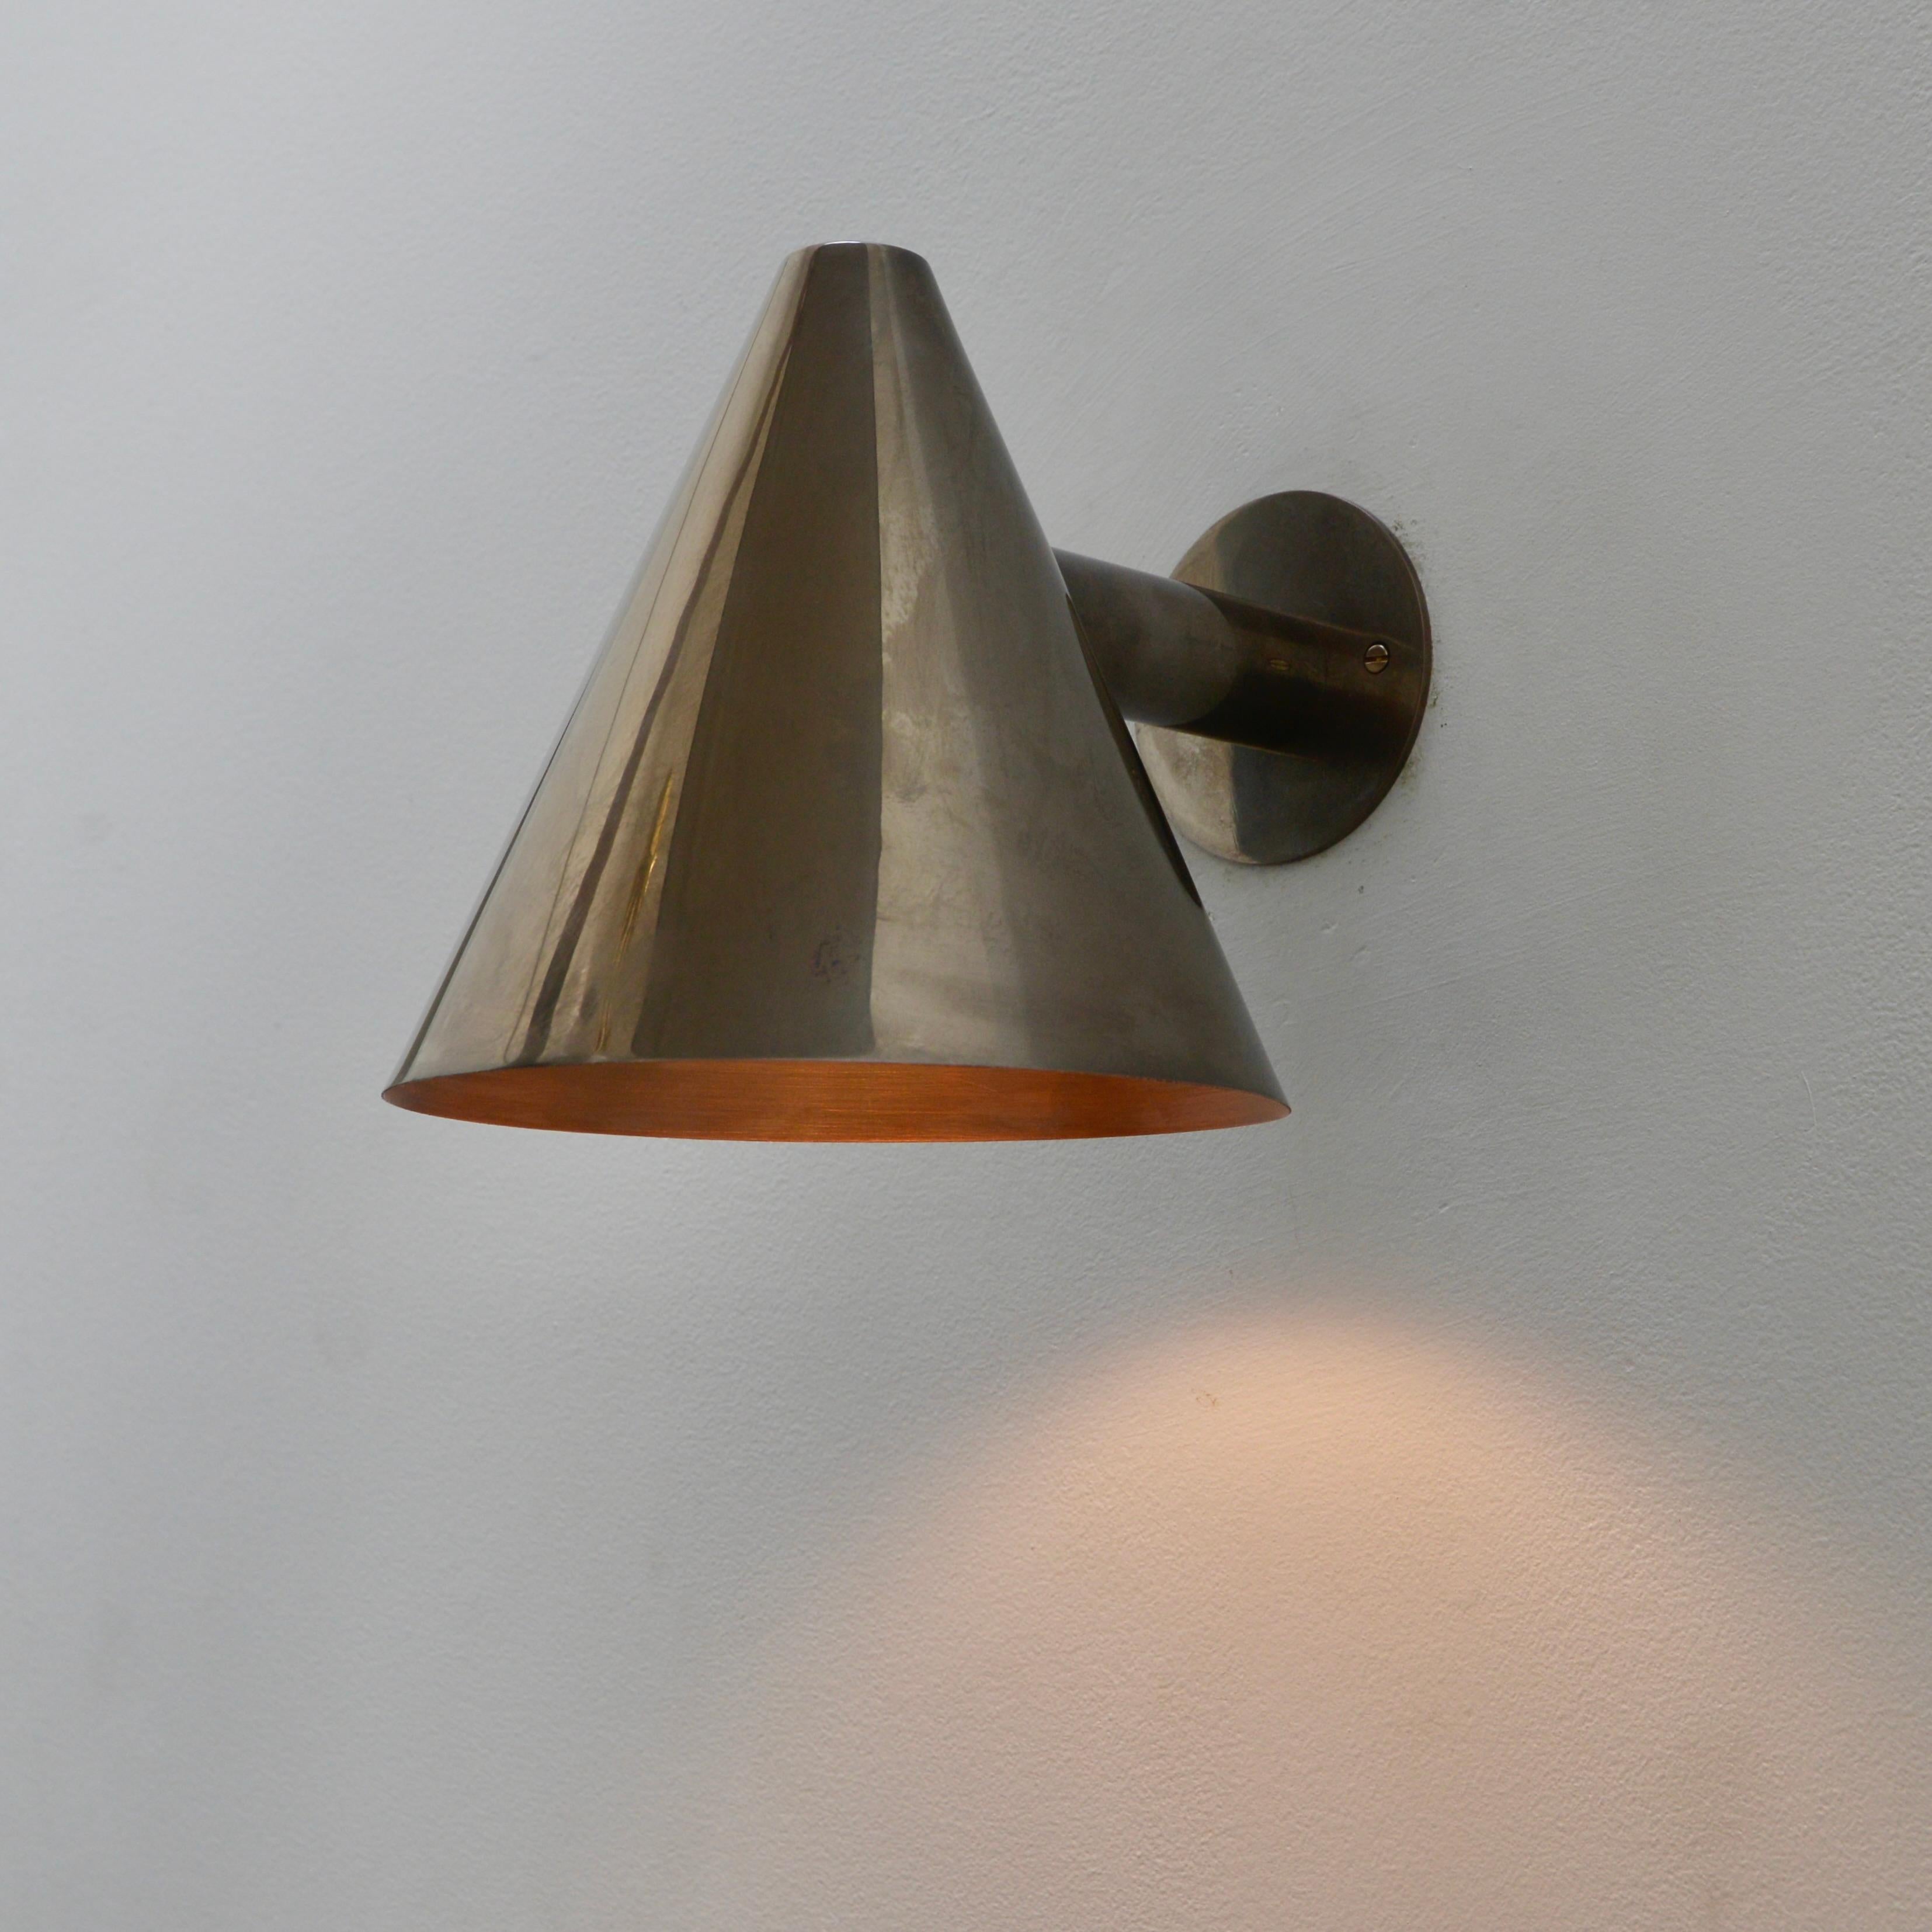 Part of our Lumfardo Luminaries contemporary collection, this larger version LUhans patinated un-lacquered copper indoor outdoor sconce is inspired by Scandinavian mid-century design. Wired with a single E26 socket for use in the US. Can be wired